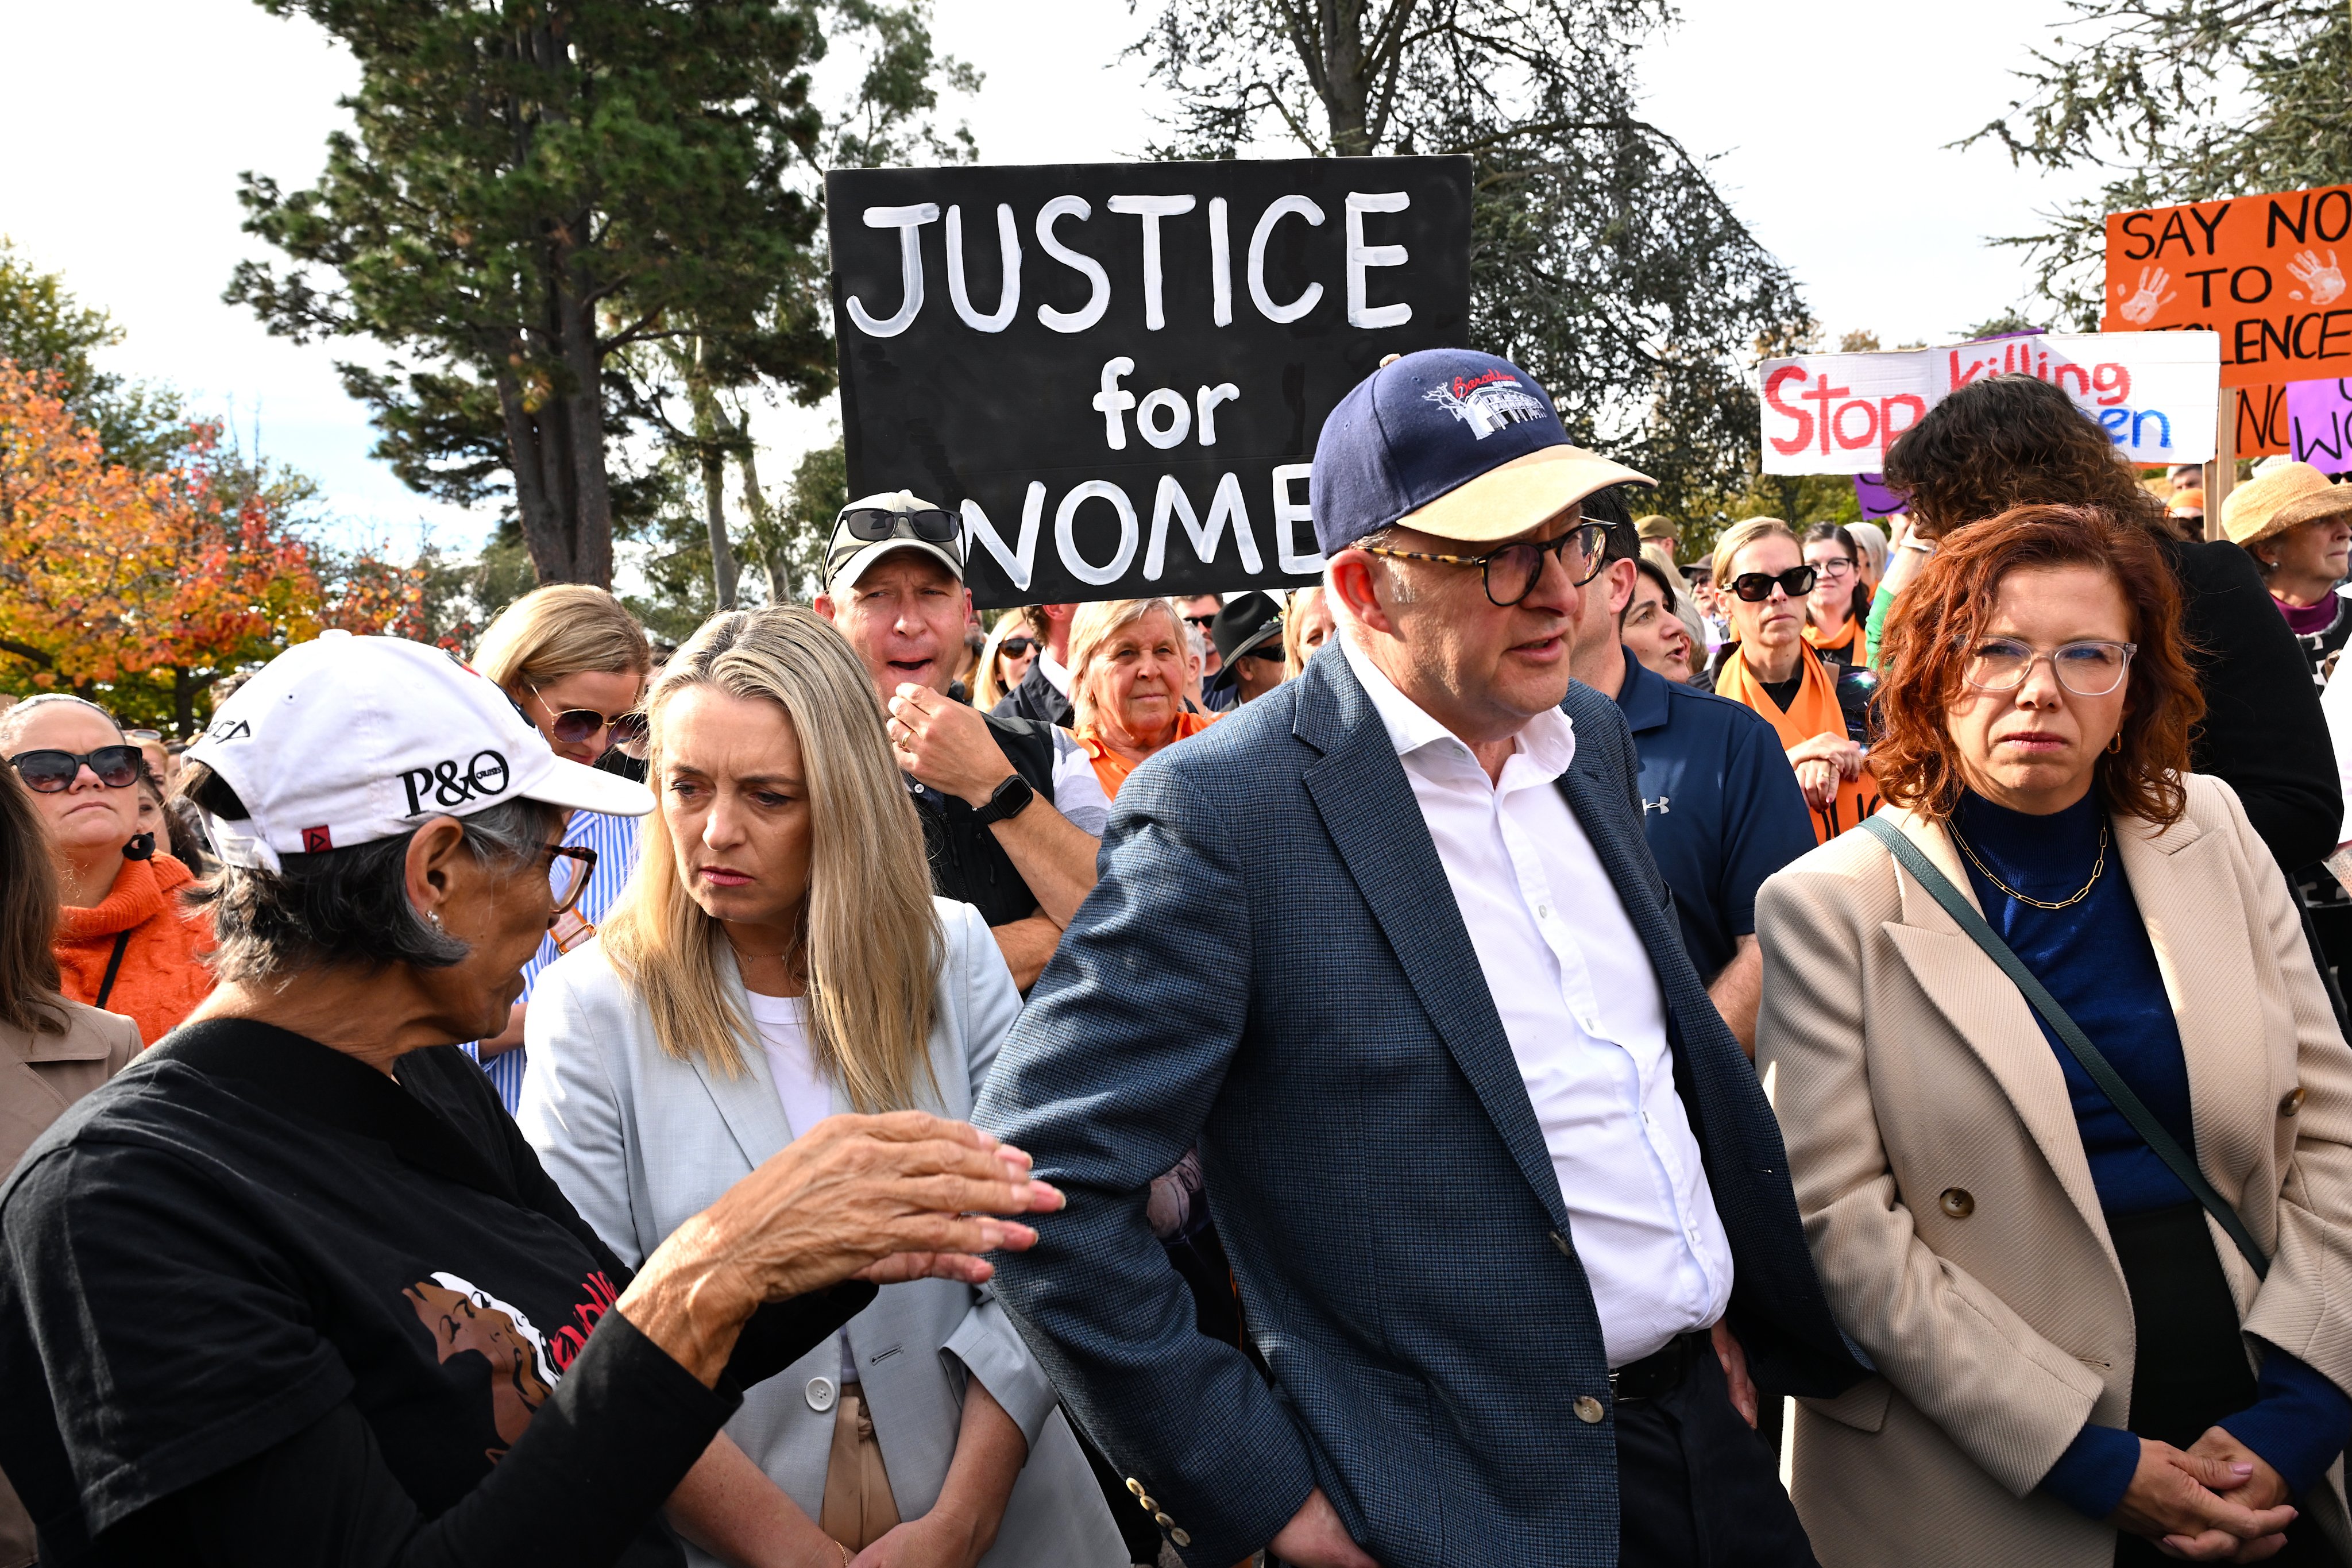 Australian Prime Minister Anthony Albanese attends a rally to a call for action to end violence against women, in Canberra, on Sunday. Photo: EPA-EFE